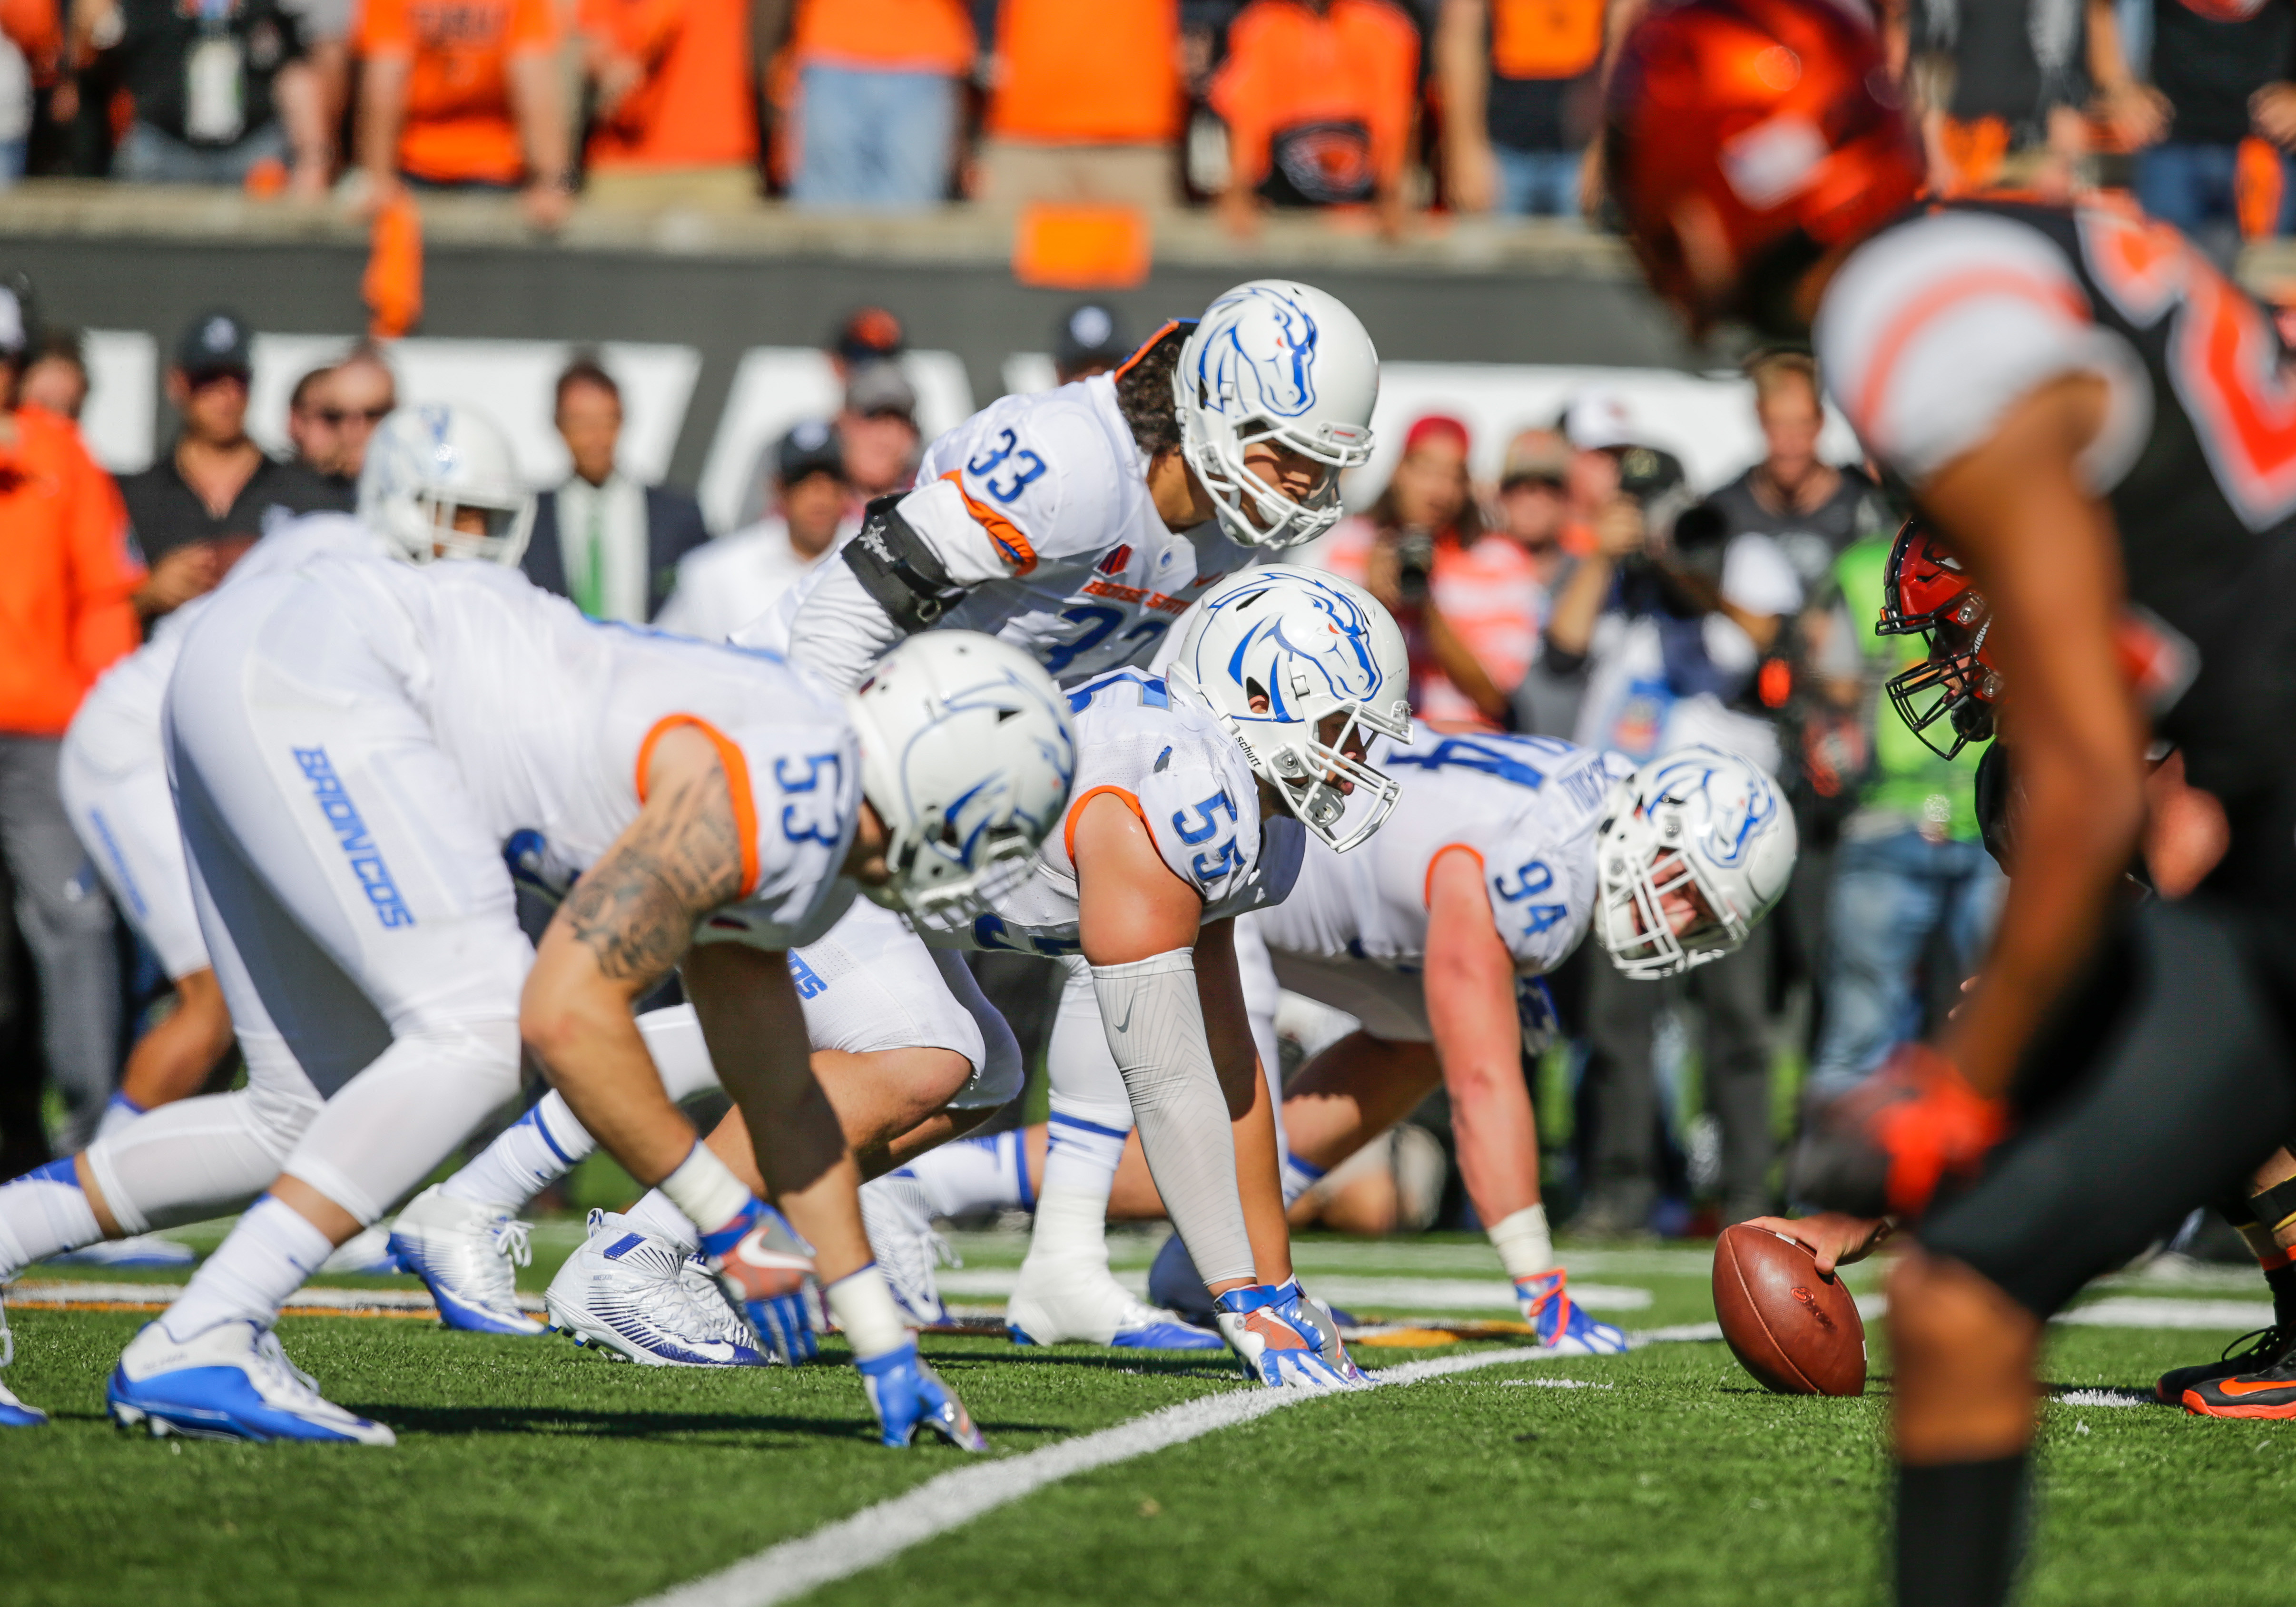 NCAA FOOTBALL: SEP 24 Boise State at Oregon State